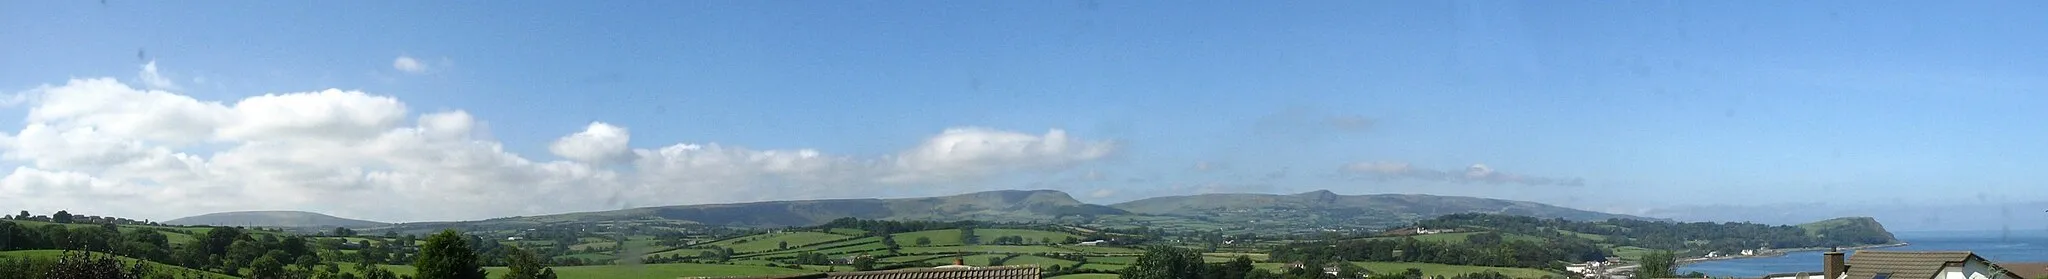 Photo showing: Panorama of Antrim Plateau and Antrim Coast from Blackcave area of Larne.
From left to right (panning from West to North): Craigy Hill / Brustin Braes, Agnew's Hill, Sallagh Braes, Knock Dhu, Scawt Hill, Drains Bay, Ballygally Head, North Channel